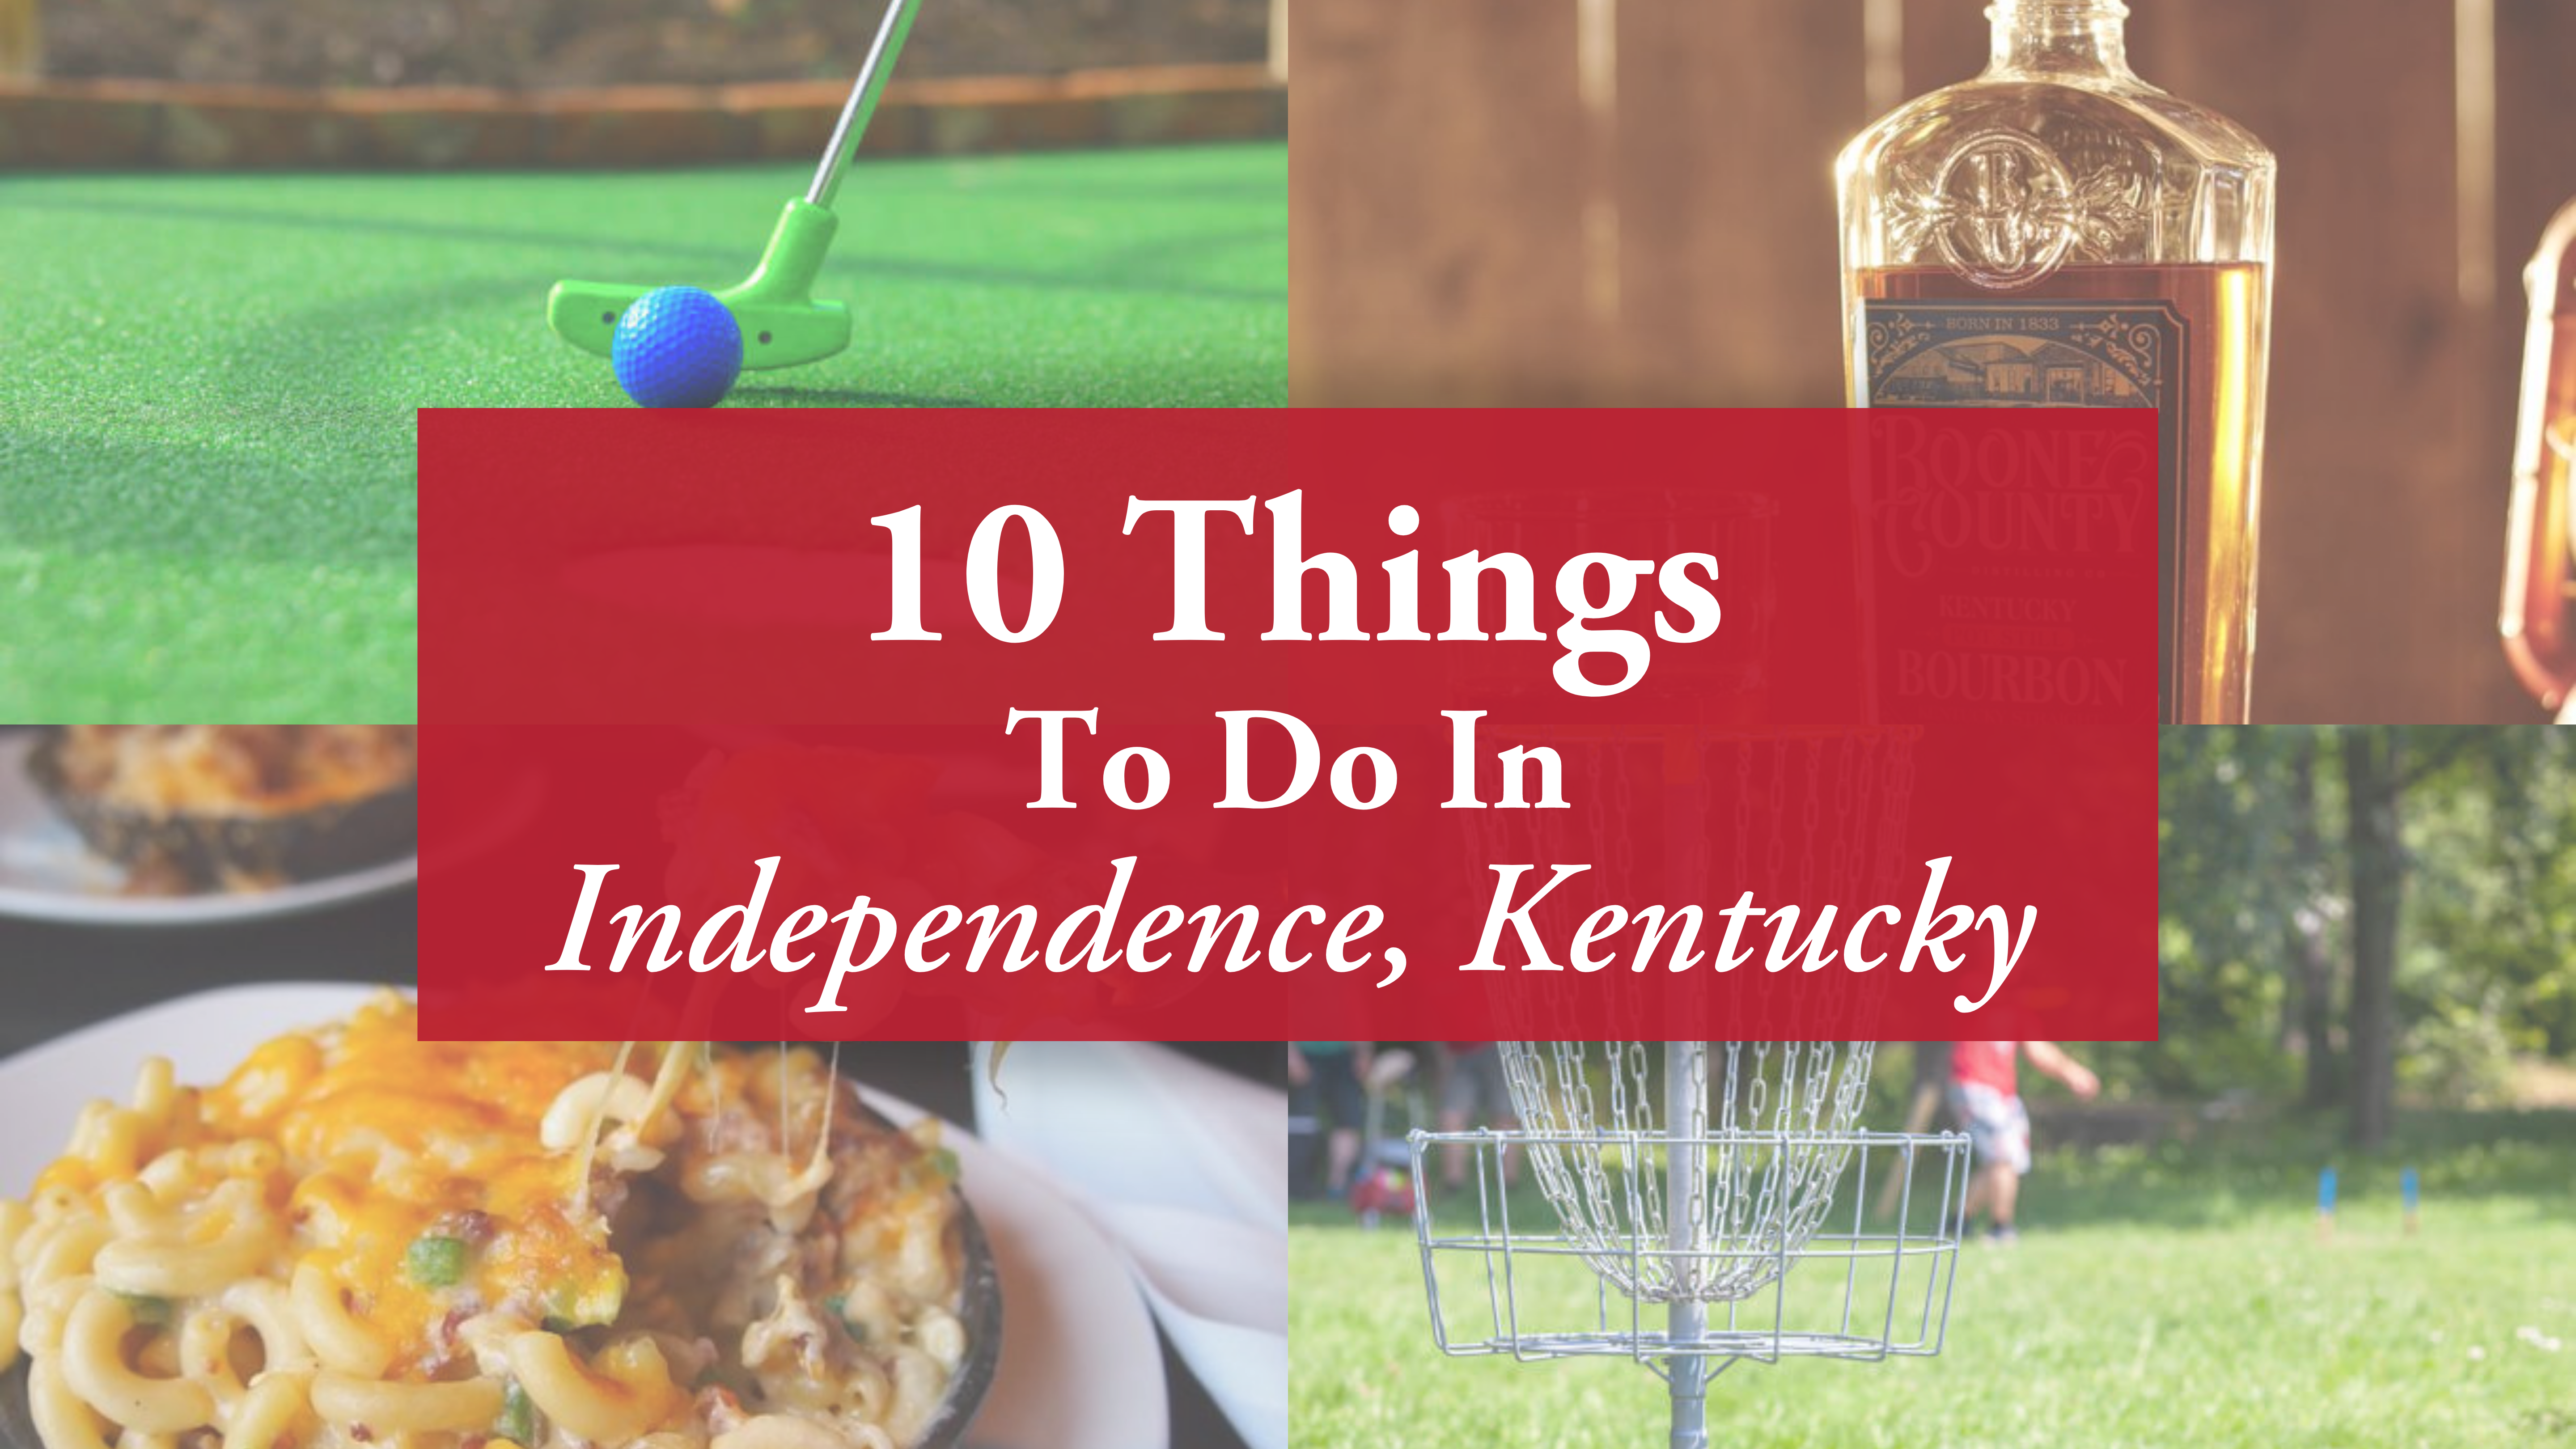 10 Things To Do in Independence, Kentucky!